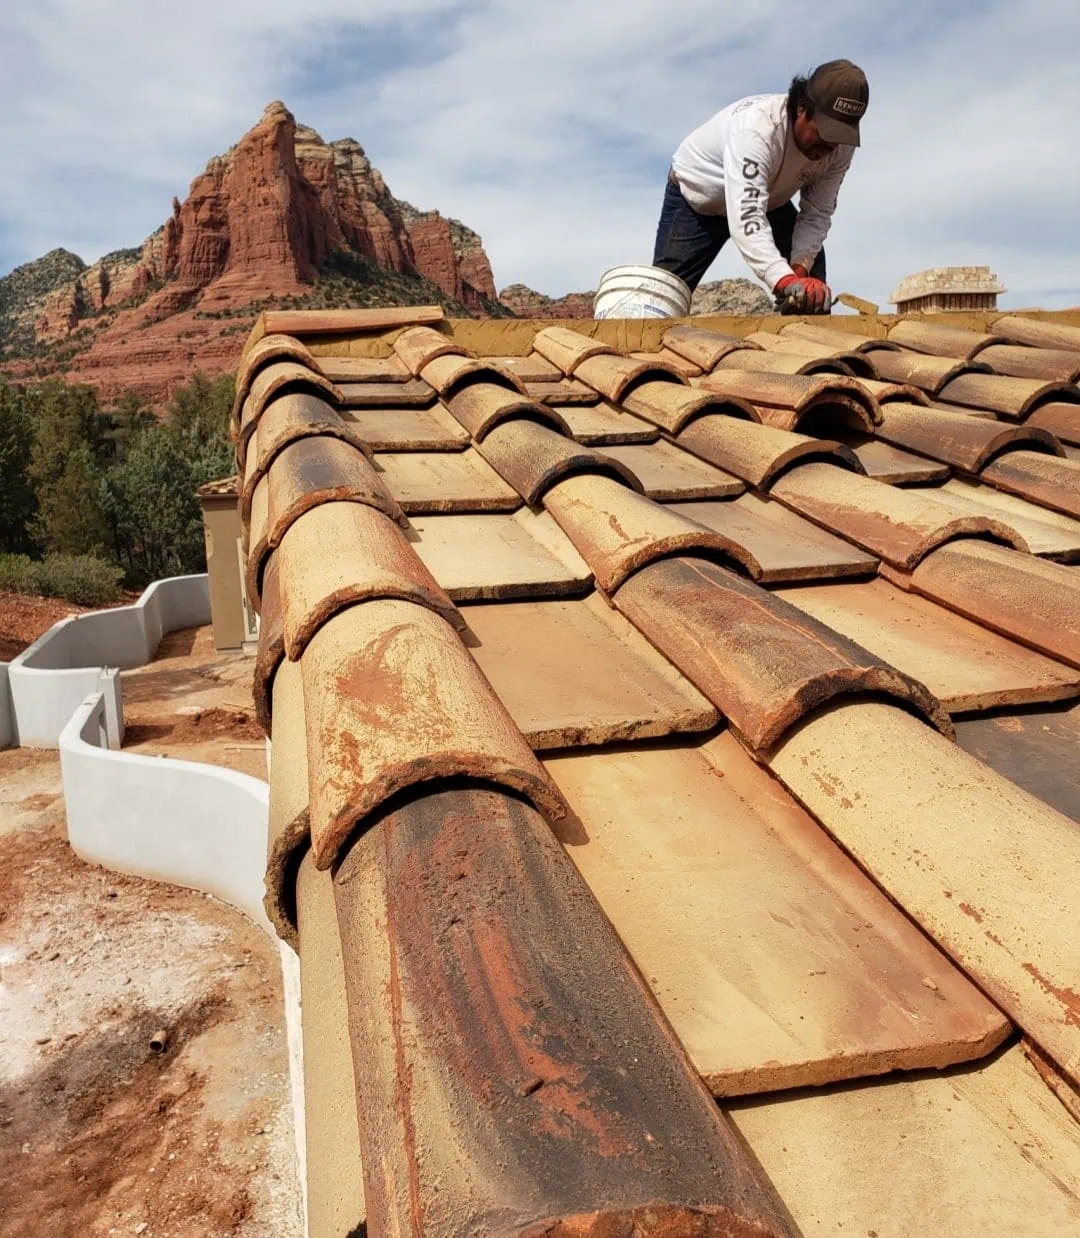 tile re roof being done by worker phoenix az